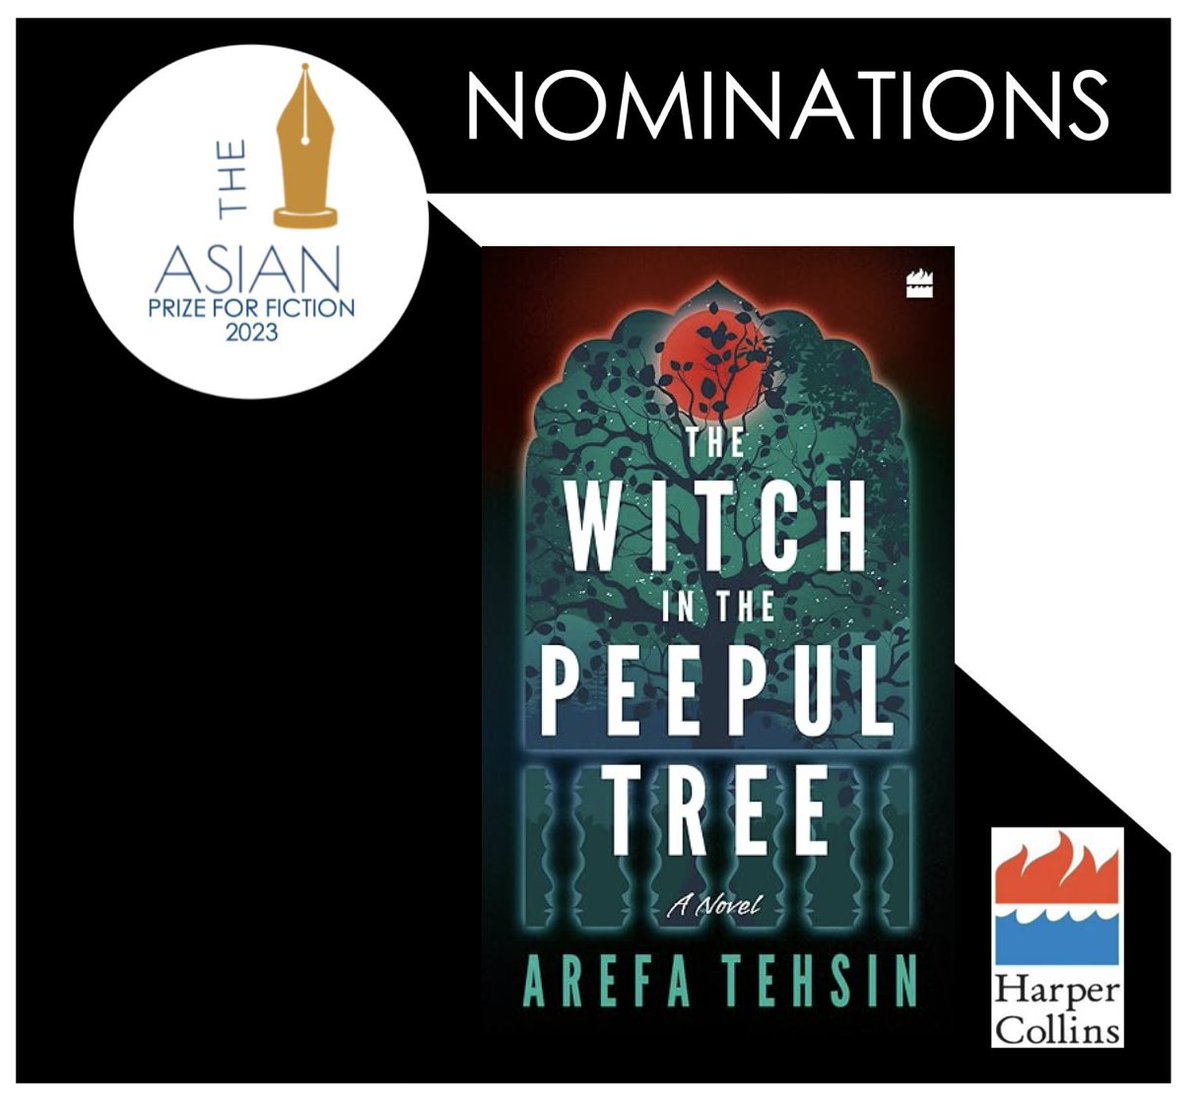 Today, we reveal another genre-twister nominated for The Asian Prize for Fiction, The Witch in the Peepul Tree, by Arefa  Tehsin, published by HarperCollins India.

@ATehsin @kan_writersside @HarperCollinsIN #theasianprizes, #bookprizes, #theasianreview, #theprizeforfiction